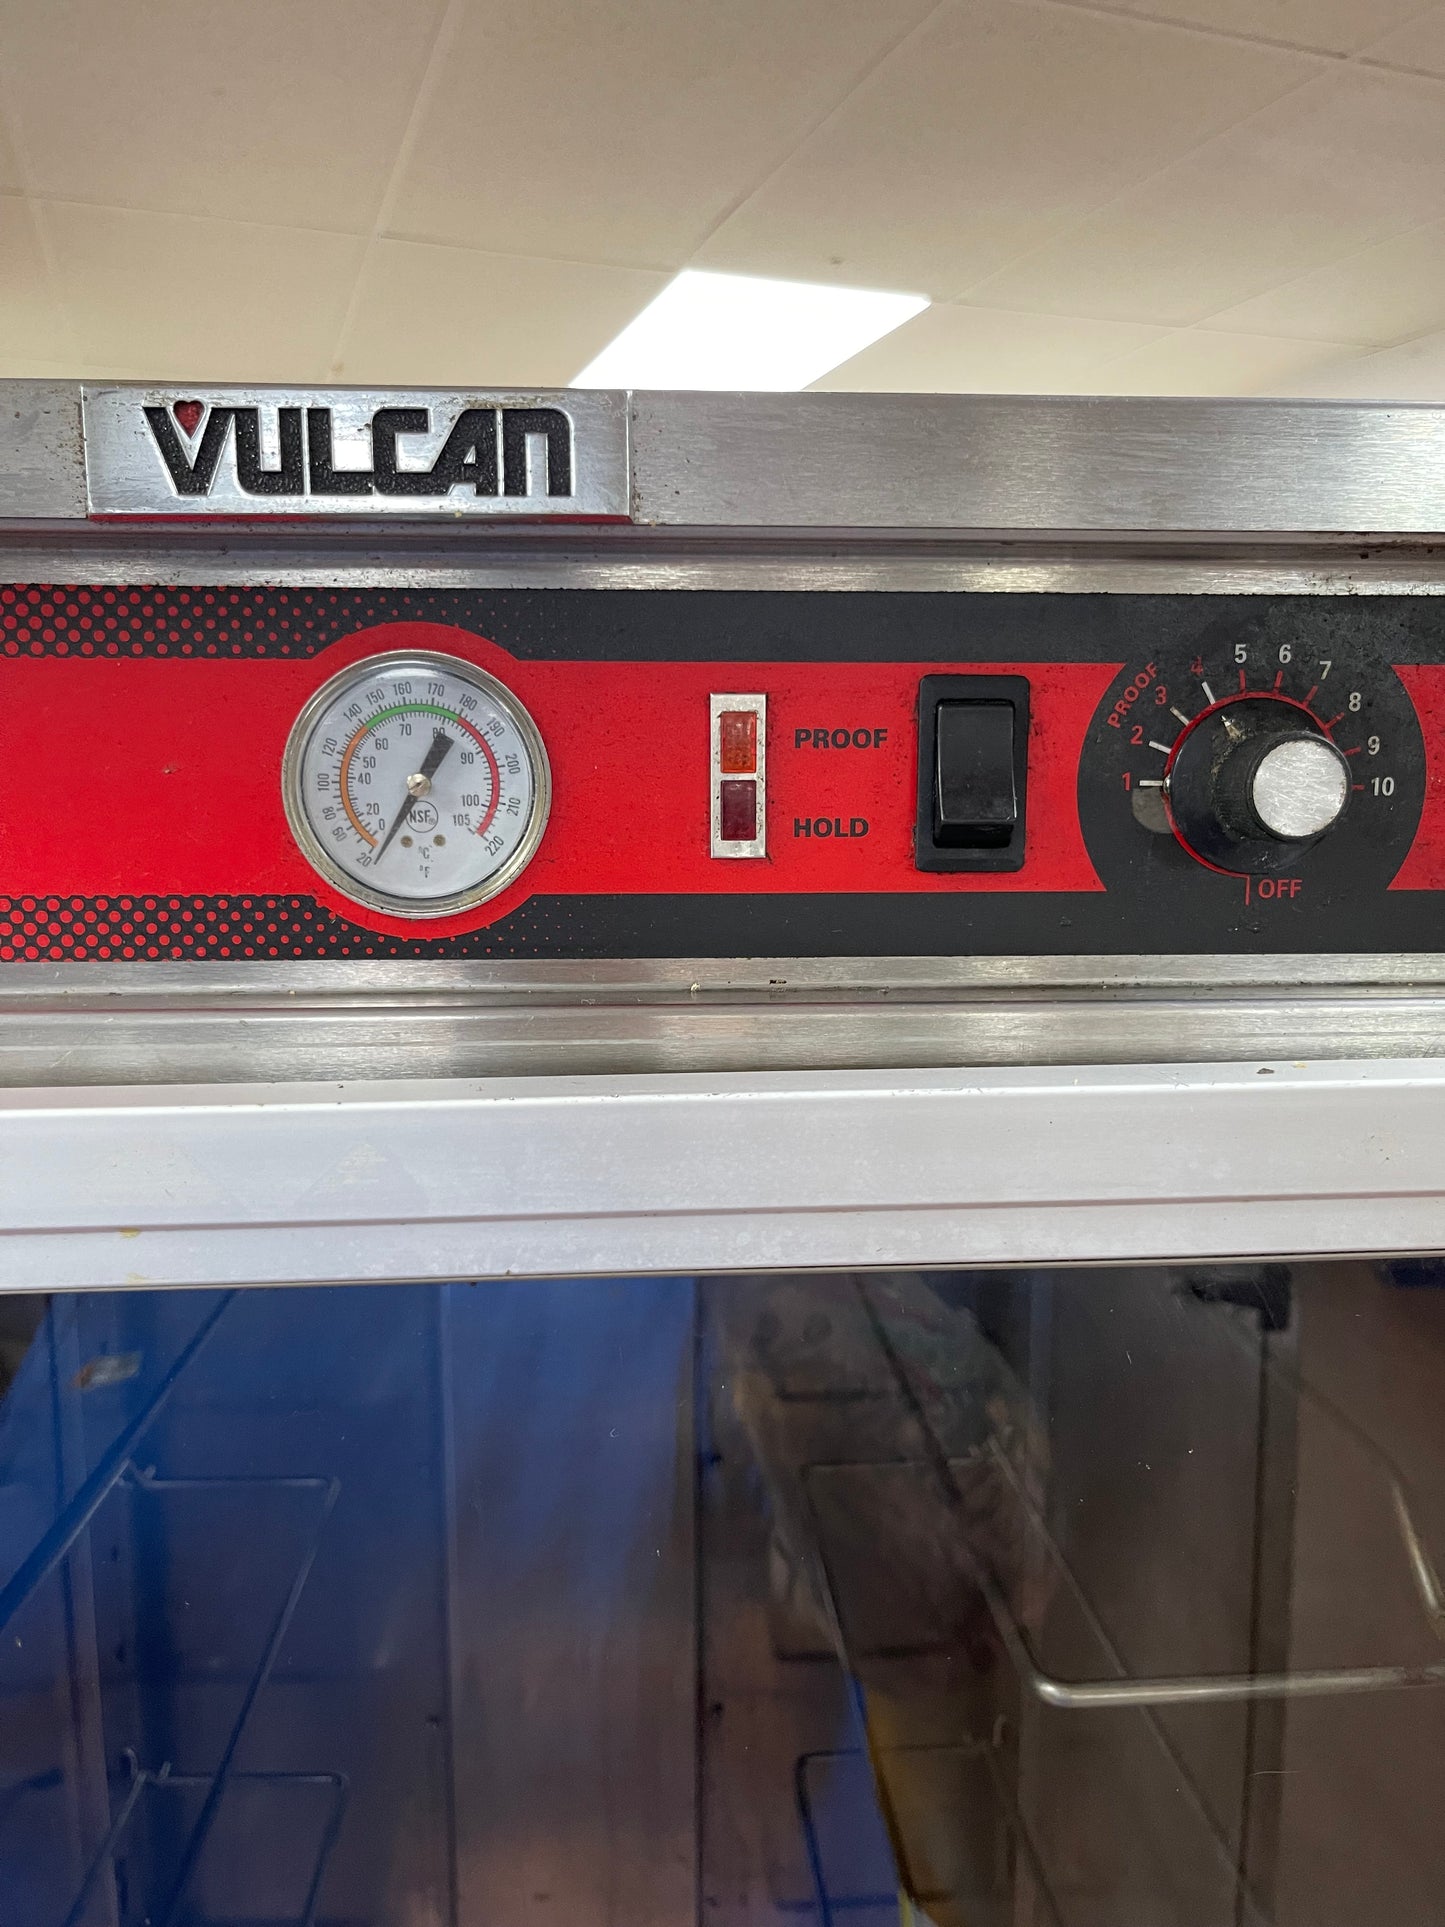 Vulcan VP18 Full Size Non-Insulated Holding / Proofing Cabinet proofer - 120V